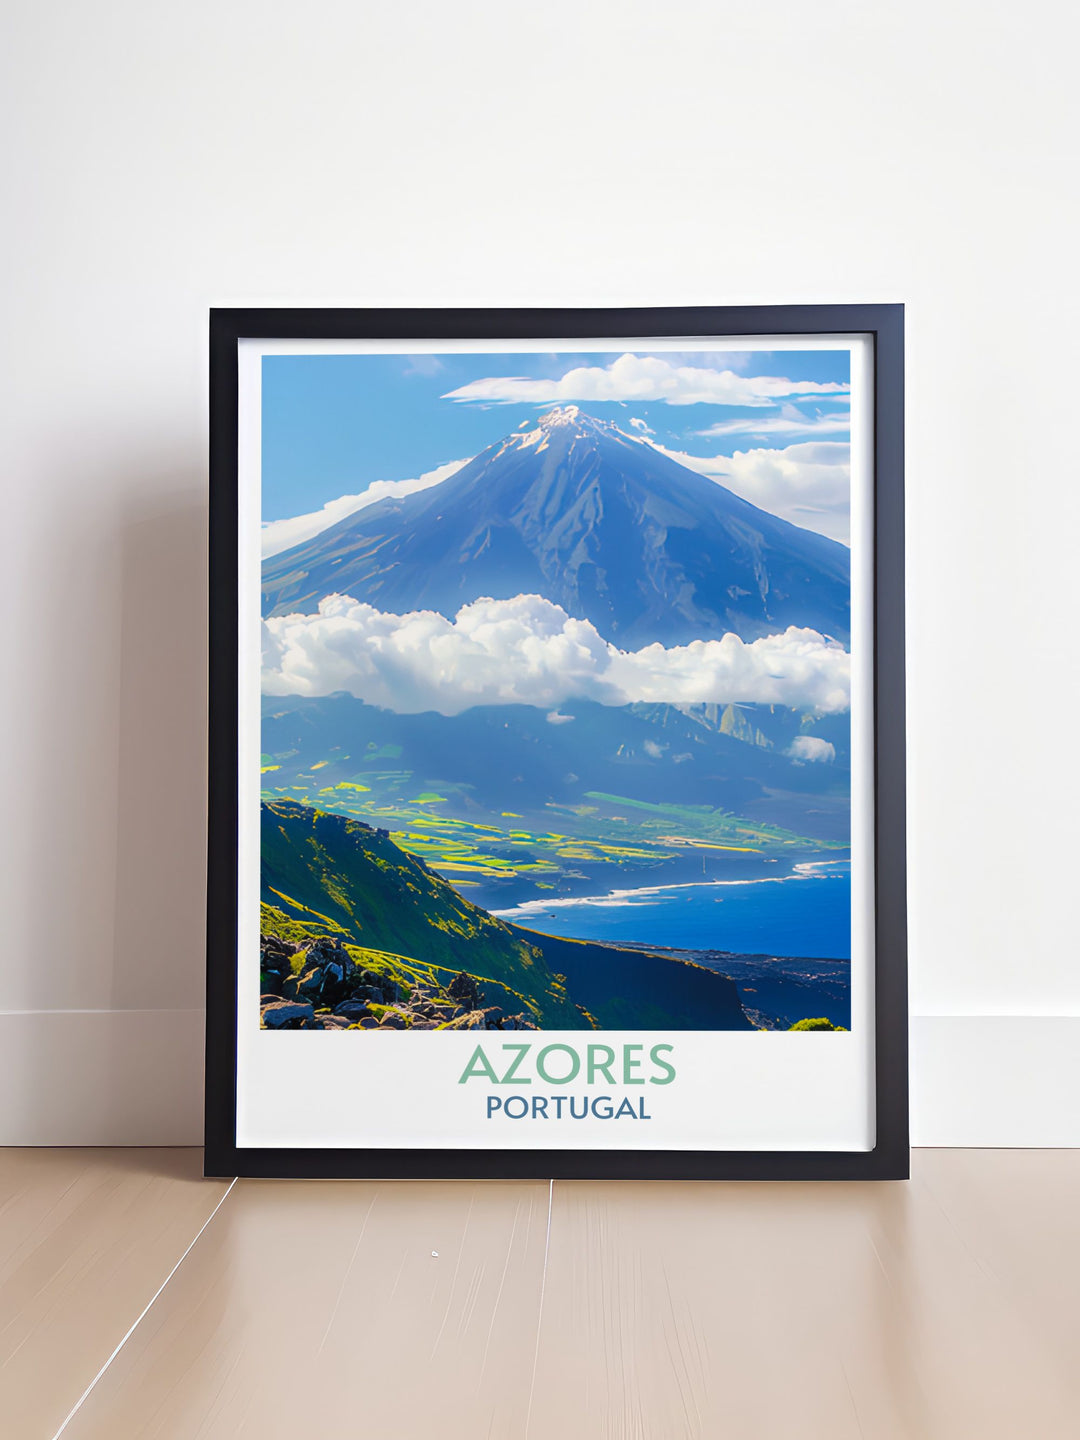 Anniversary gift worthy print of Mount Pico, capturing the essence of Azores natural beauty in a fine line beautiful design.